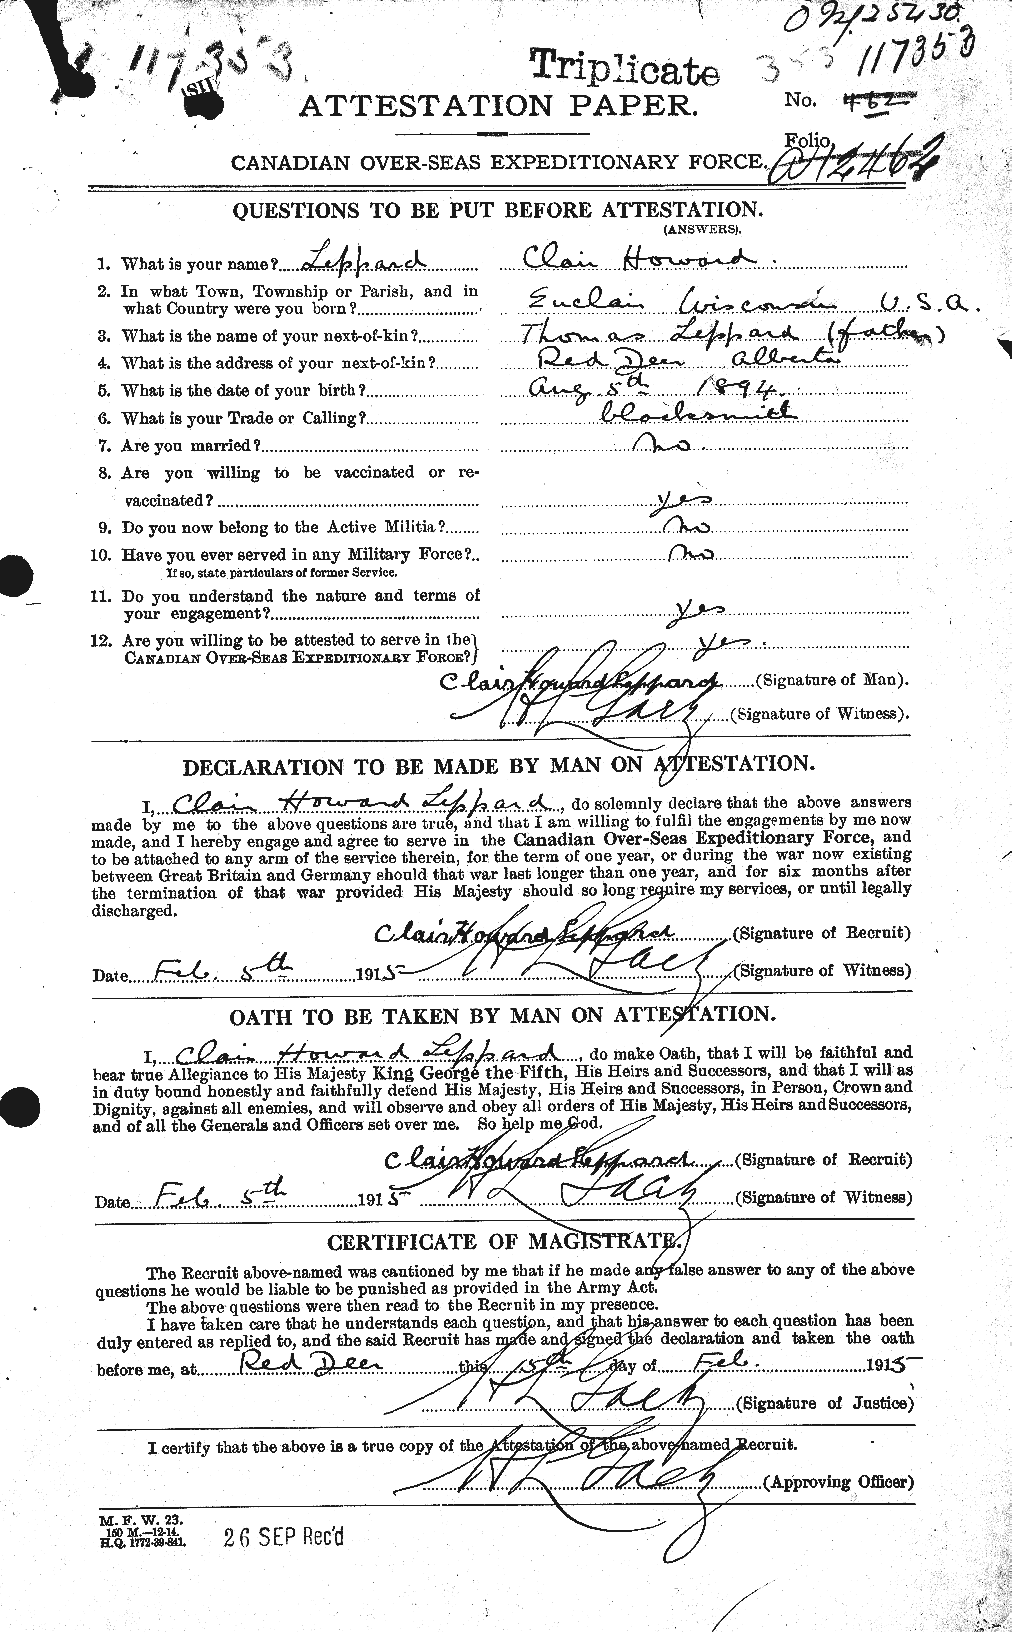 Personnel Records of the First World War - CEF 462981a